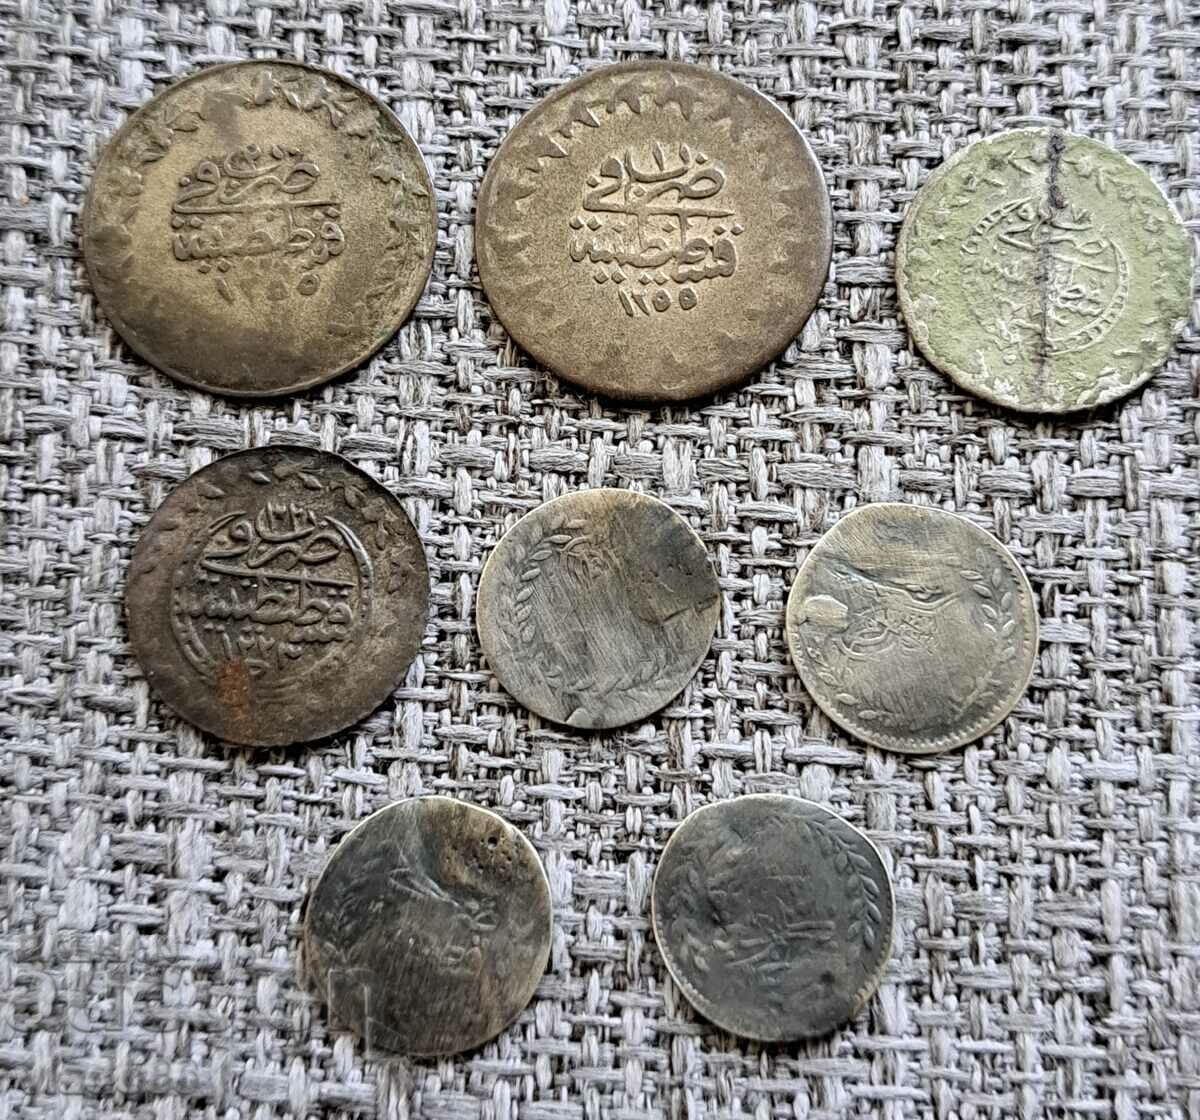 Lot of Ottoman coins